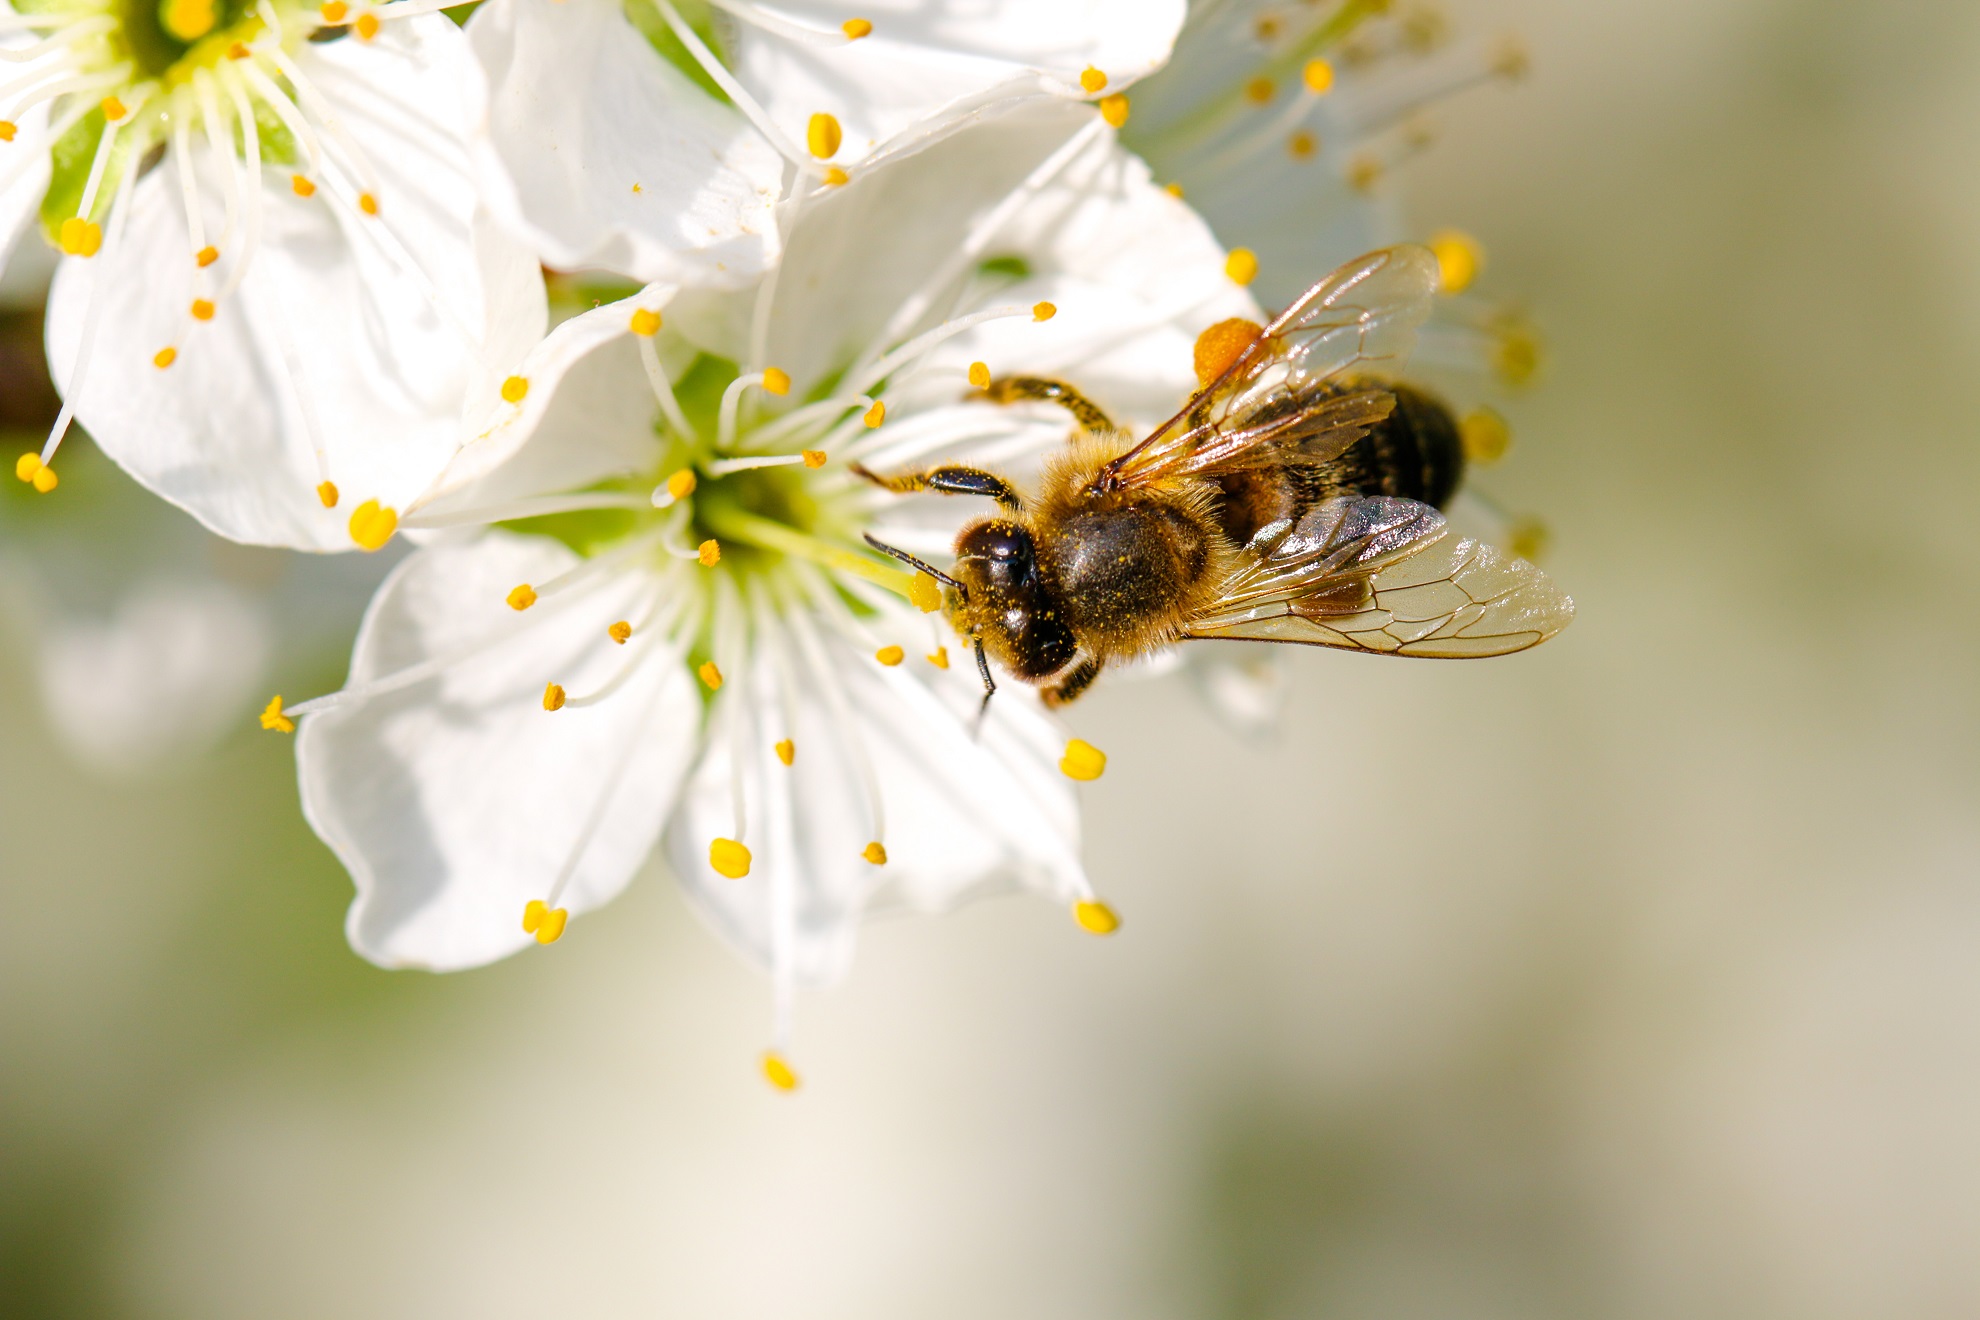 contact bee removal company